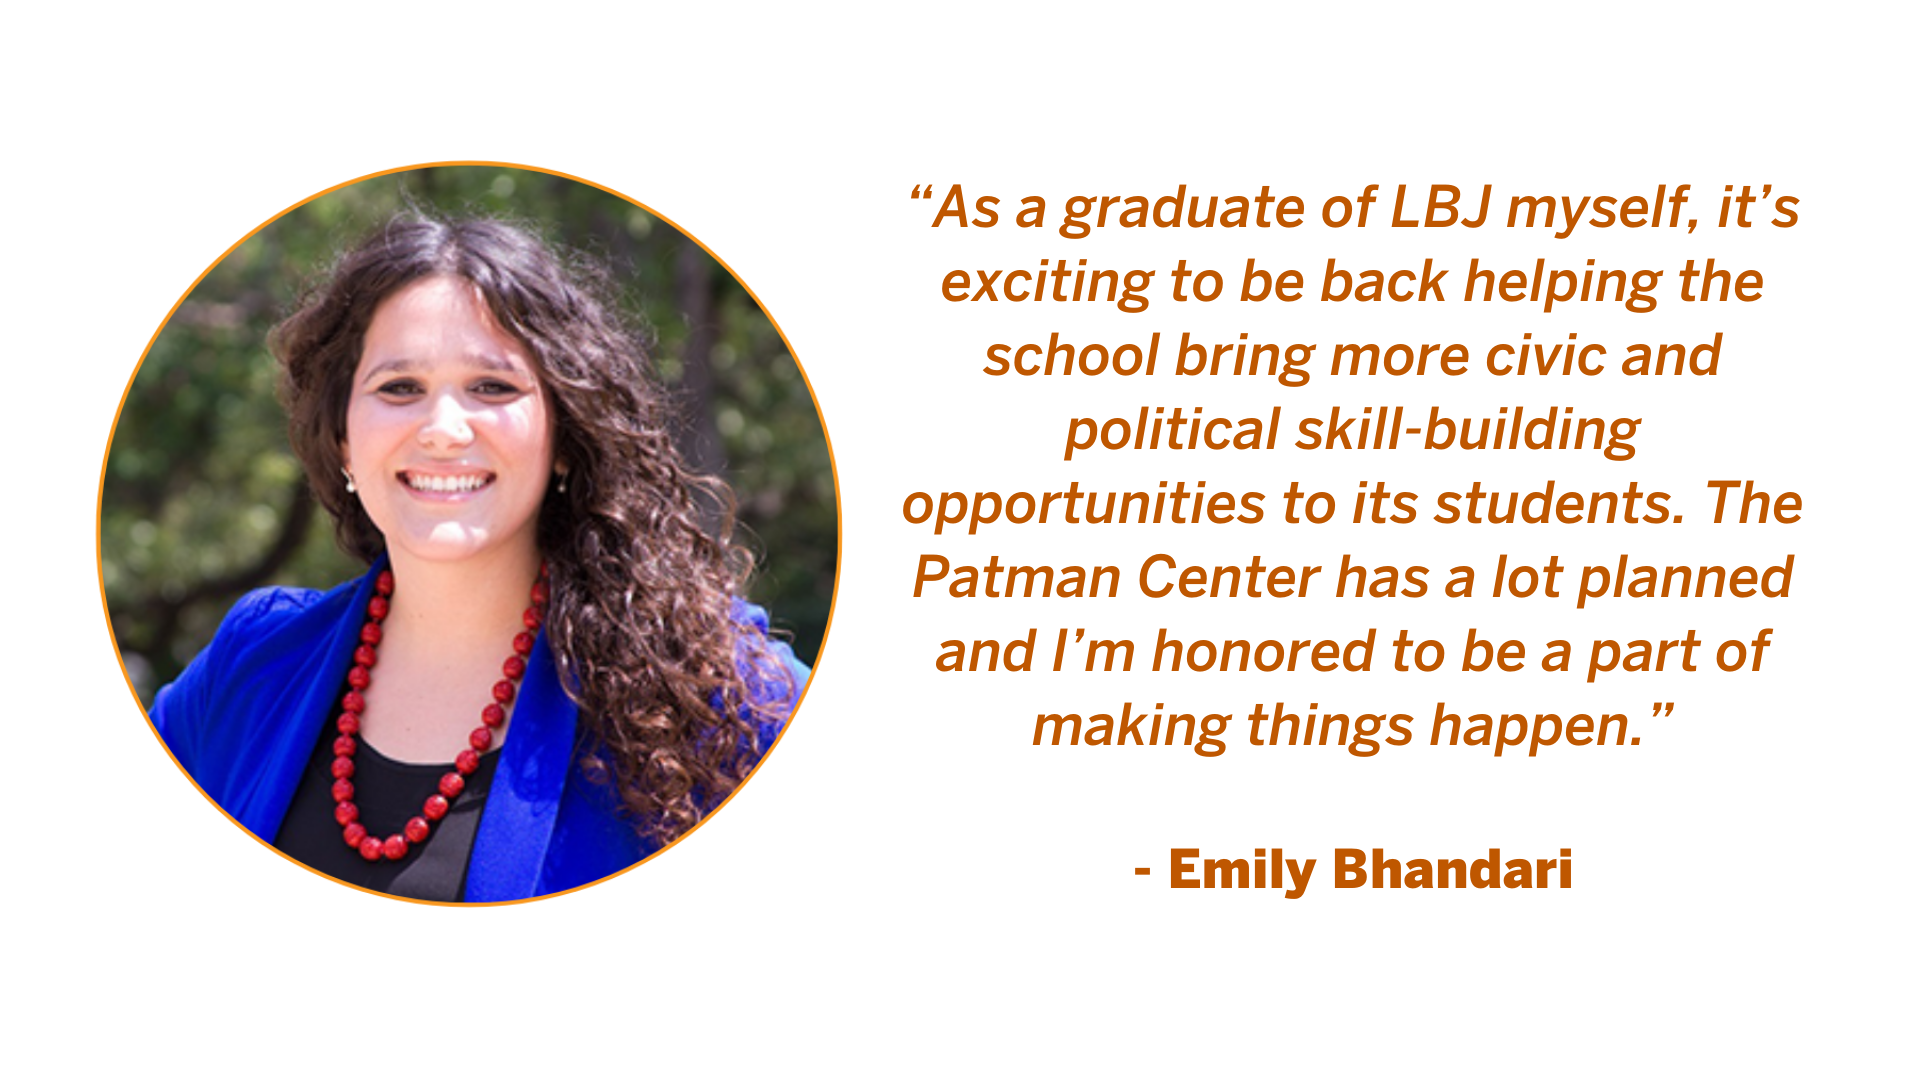 Emily Bhandari Quote: “As a graduate of LBJ myself, it’s exciting to be back helping the school bring more civic and political skill-building opportunities to its students. The Patman Center has a lot planned and I’m honored to be a part of making things happen.”